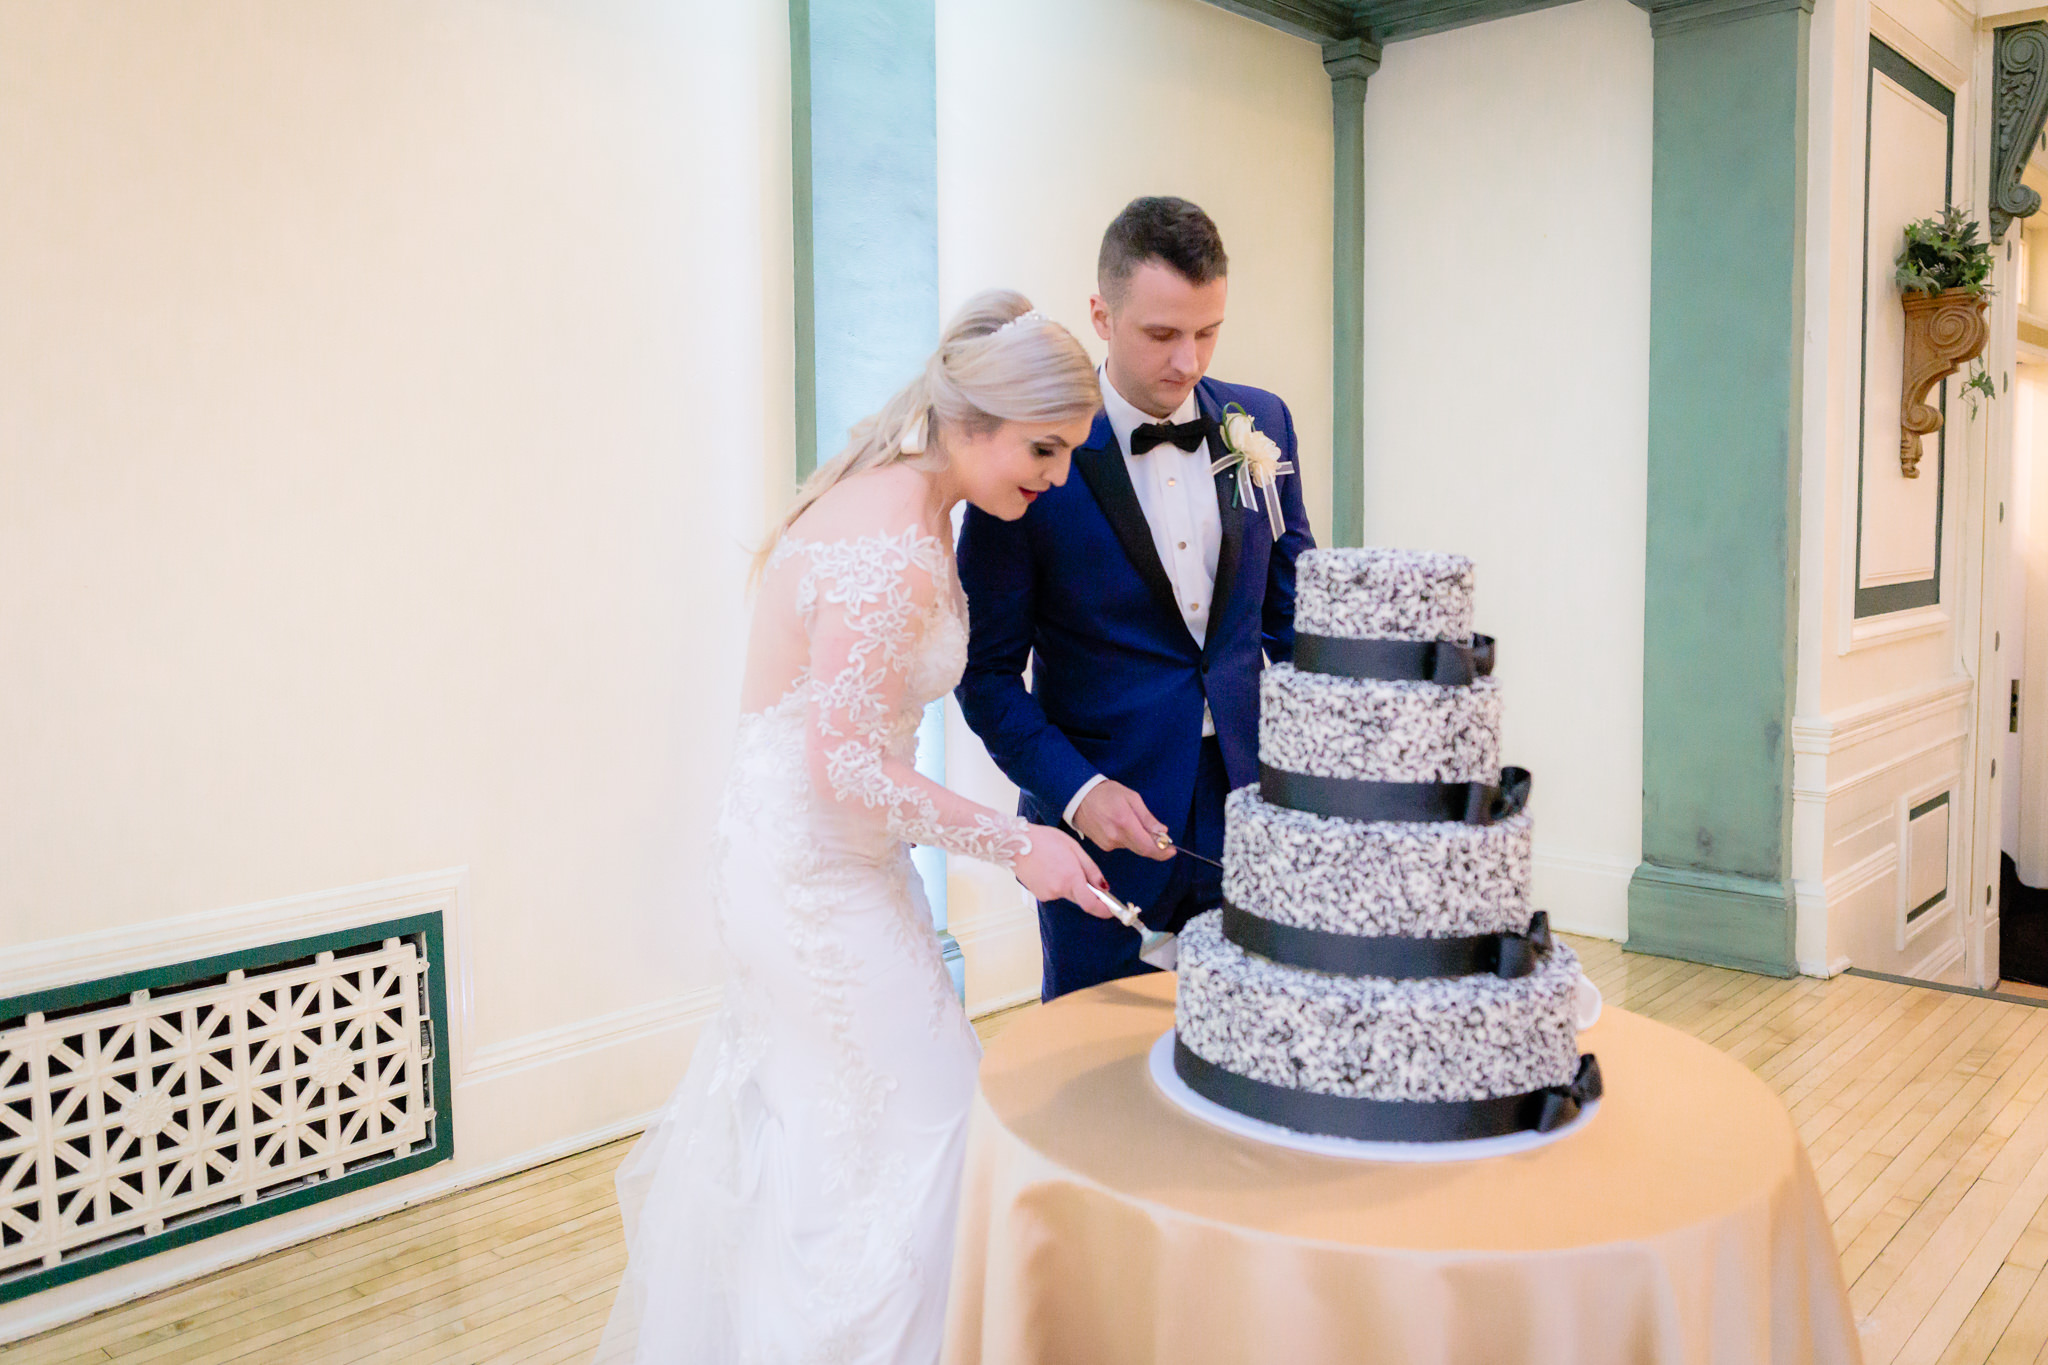 Newlyweds cut the cake at their Soldiers & Sailors wedding